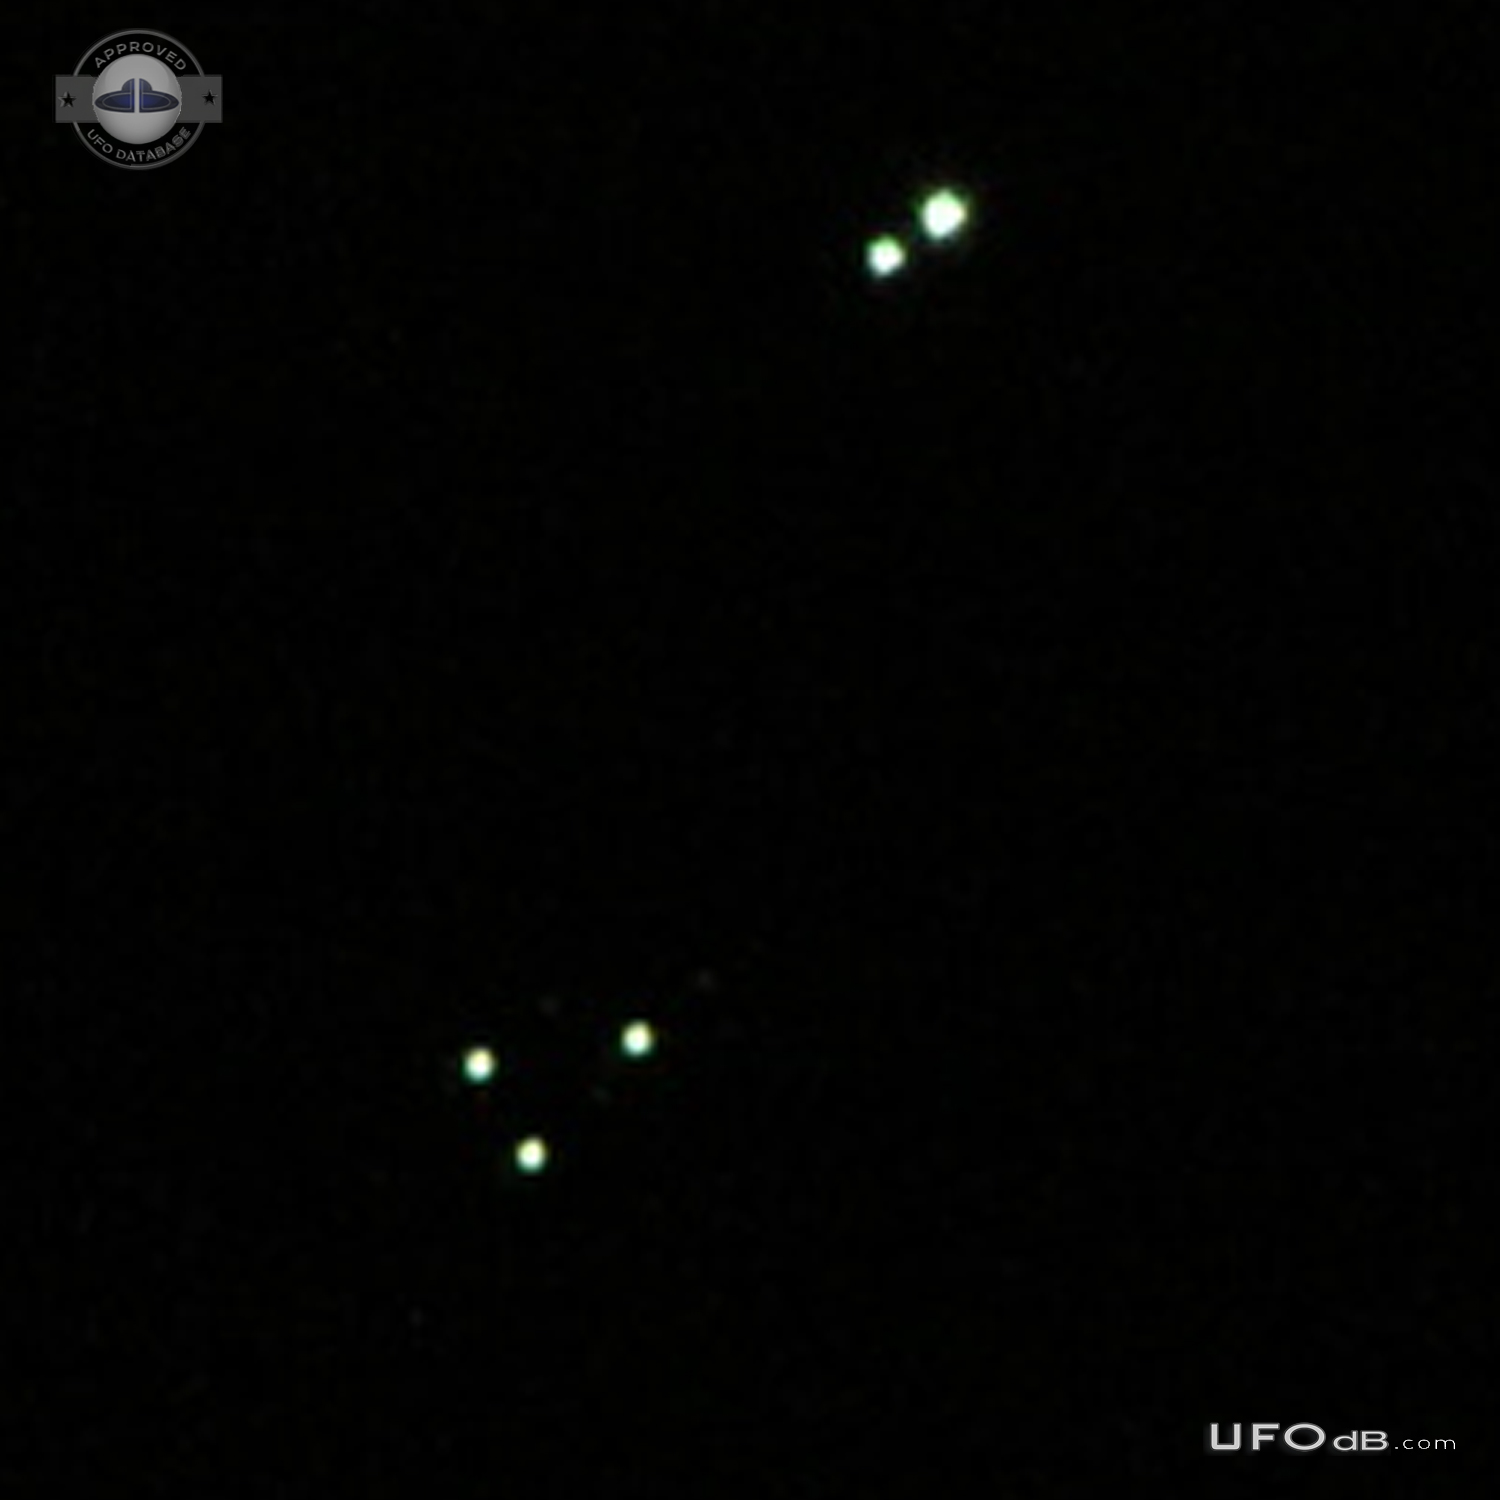 Multiple UFOs alternately flashing and circling each other in groups - UFO Picture #712-4